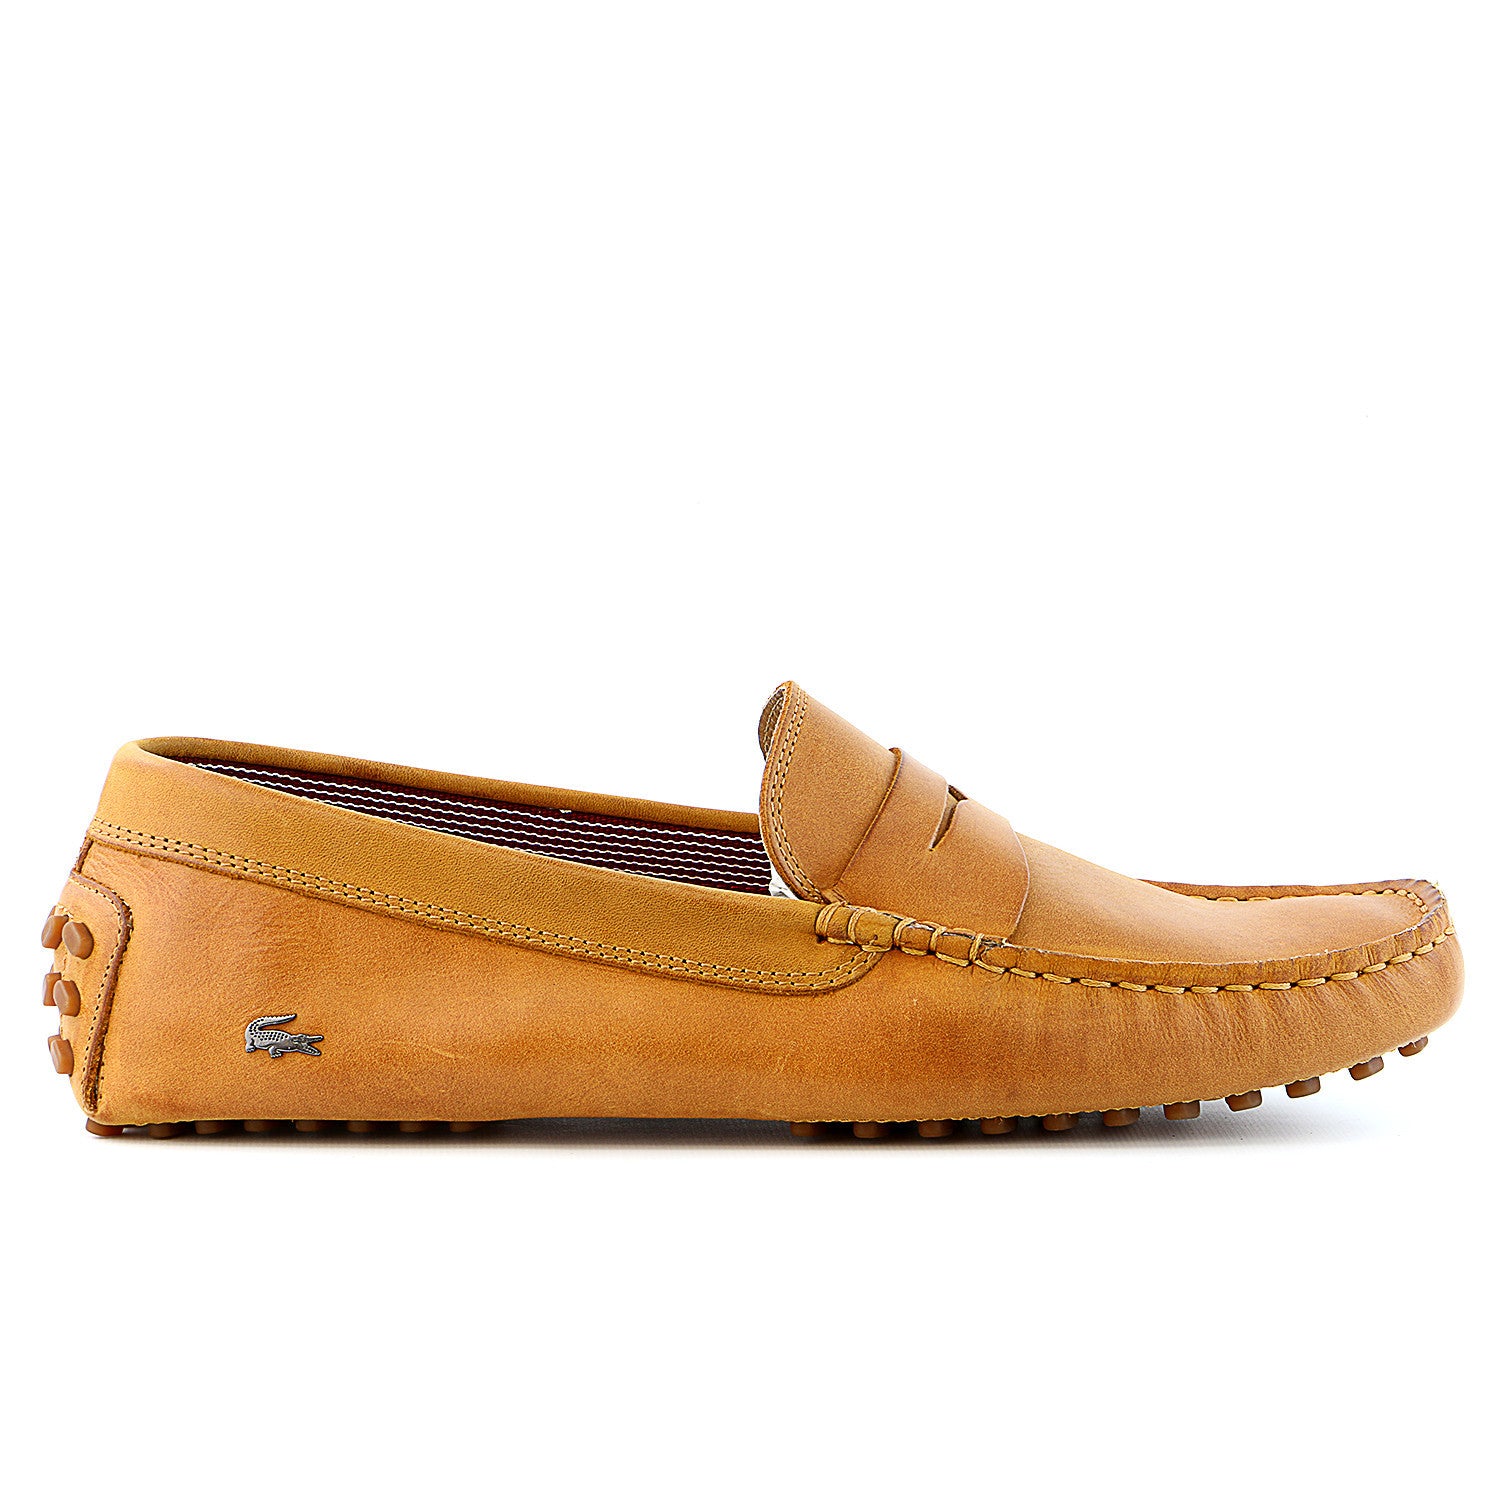 lacoste moccasins, OFF 75%,Buy!